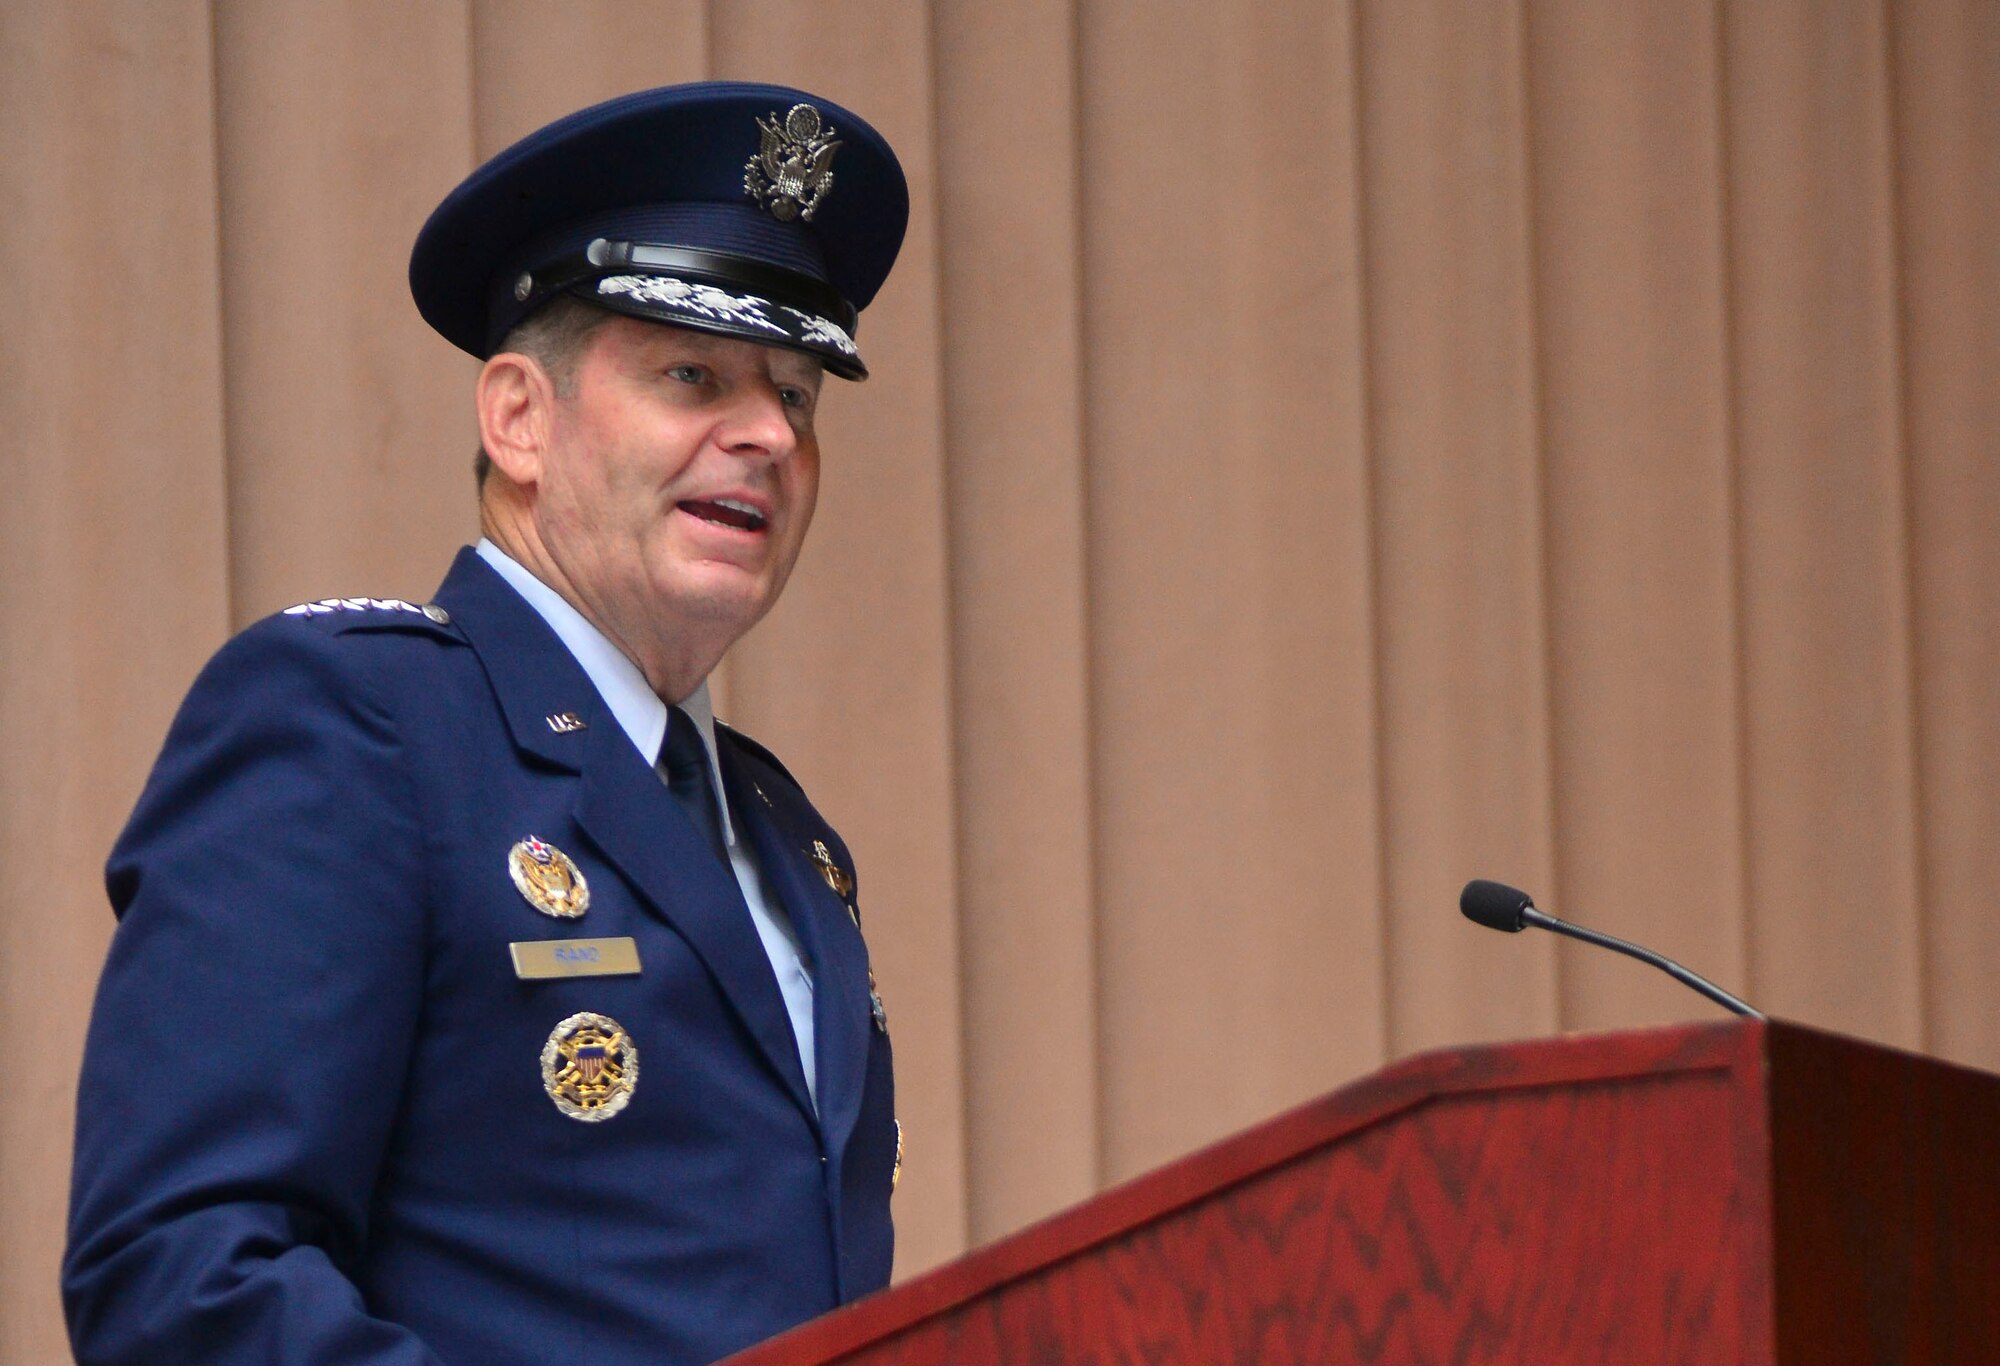 Gen. Robin Rand provides remarks after taking command of Air Force Global Strike Command during a ceremony at Barksdale Air Force Base, La., July 28, 2015. Rand said he will ensure AFGSC and its Airmen are ready to carry the nation’s load of developing and providing combat ready forces for nuclear deterrence and conventional global strike operations. (U.S Air Force photo/Airman 1st Class Mozer O. Da Cunha)